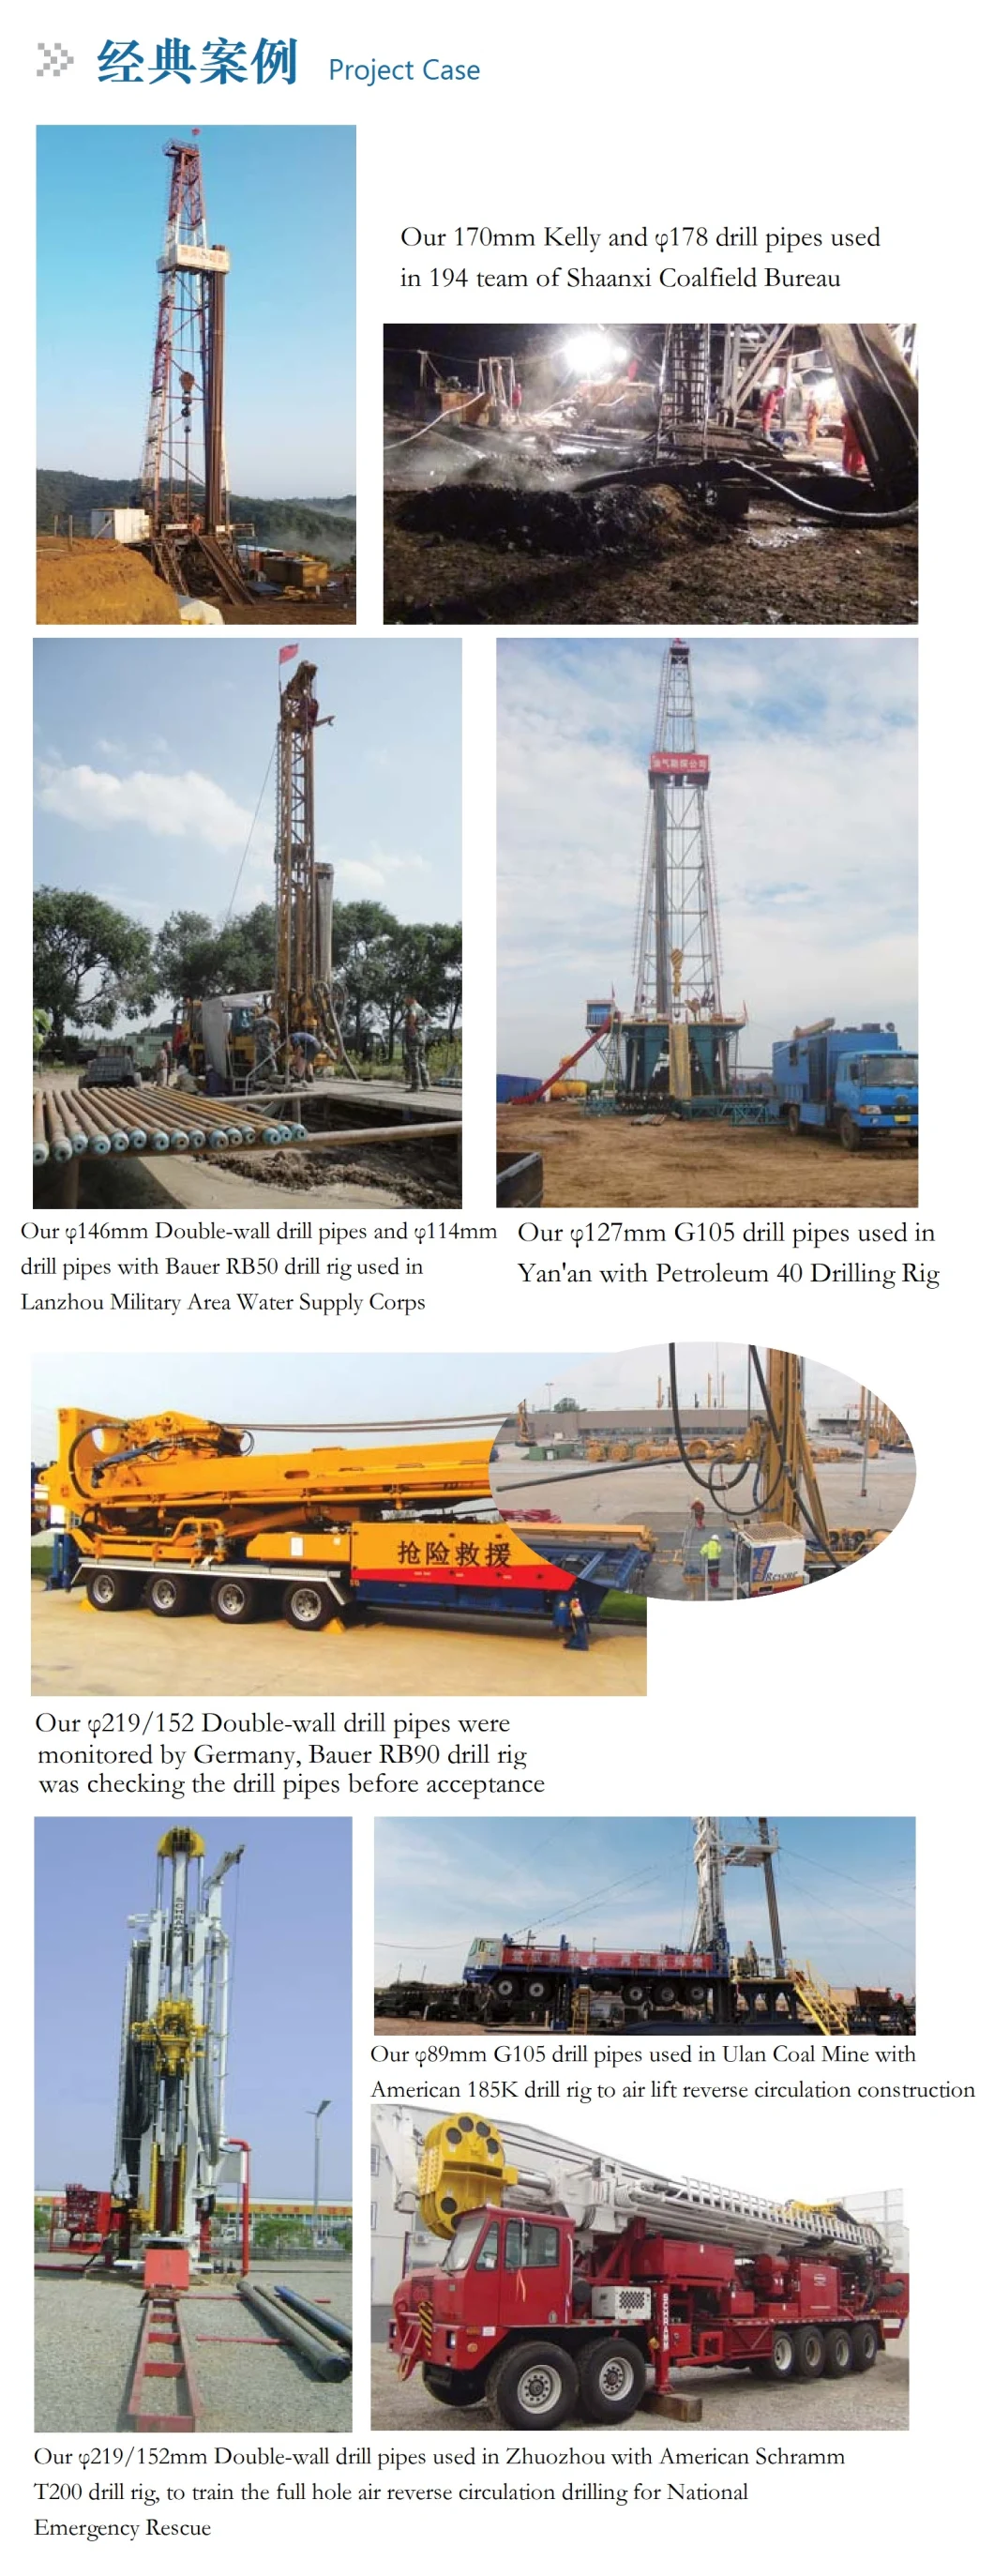 Spt-600 Drilling Rig for Geological and Geothermal Development